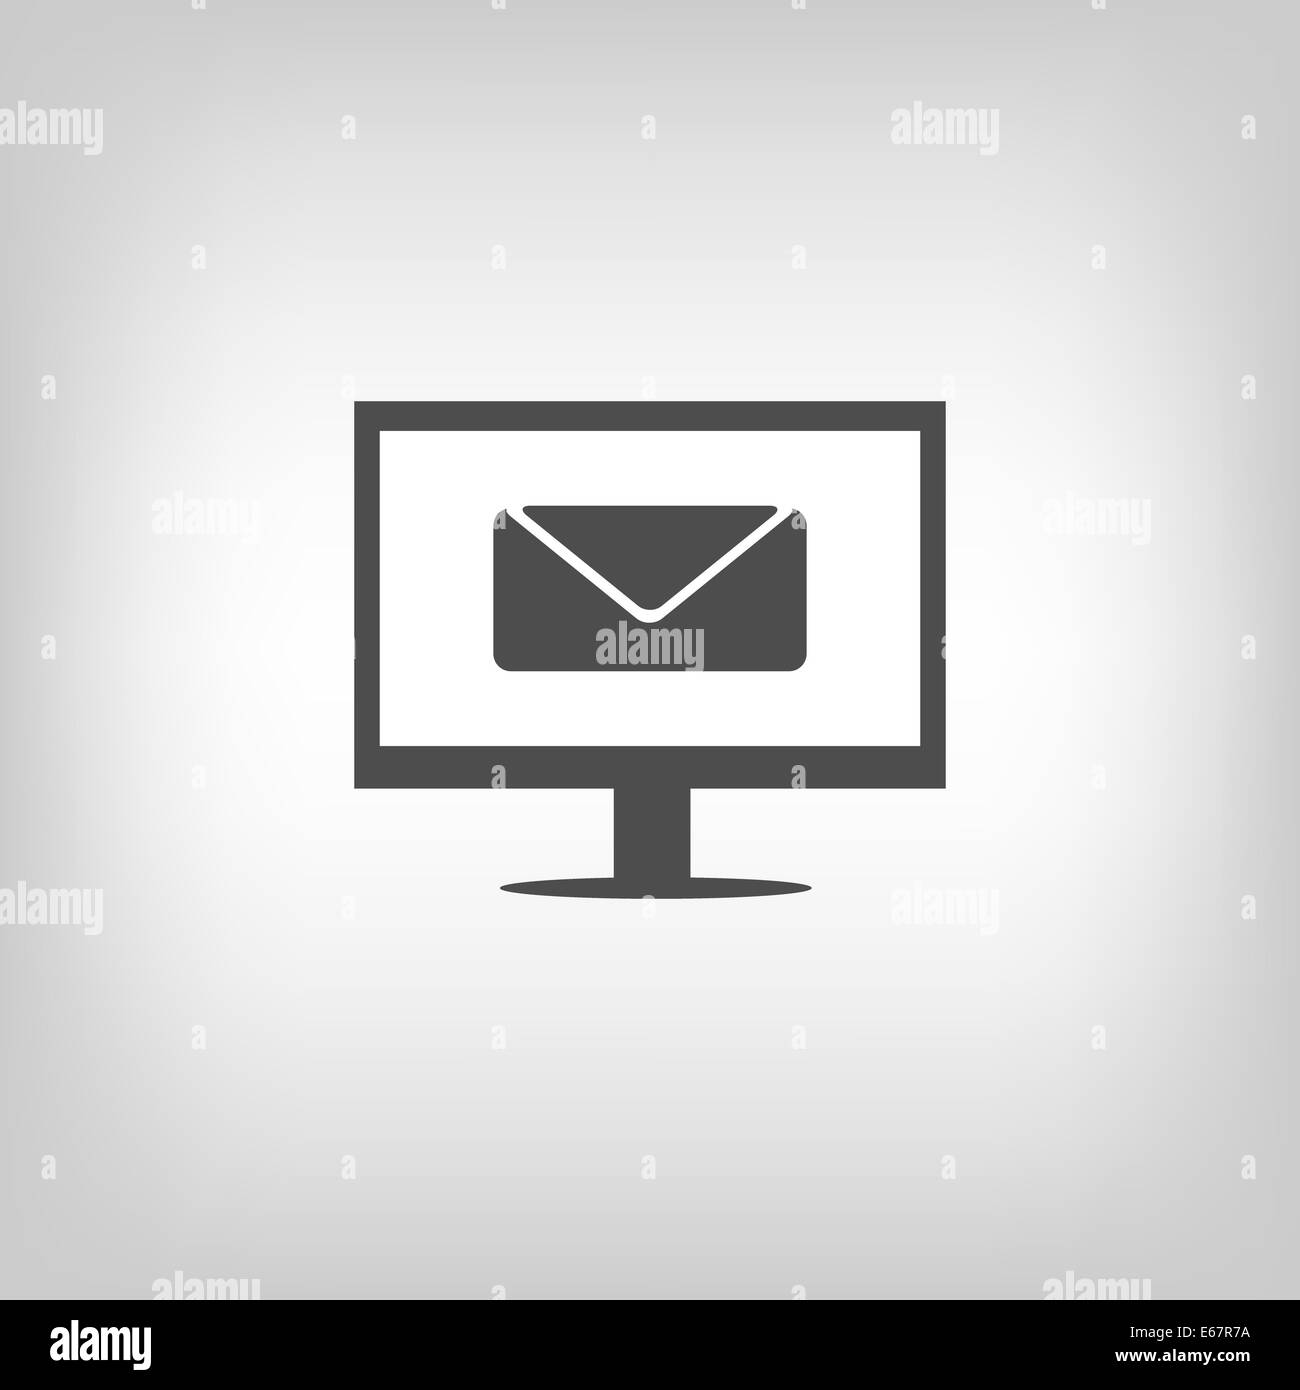 Email sign Stock Photo